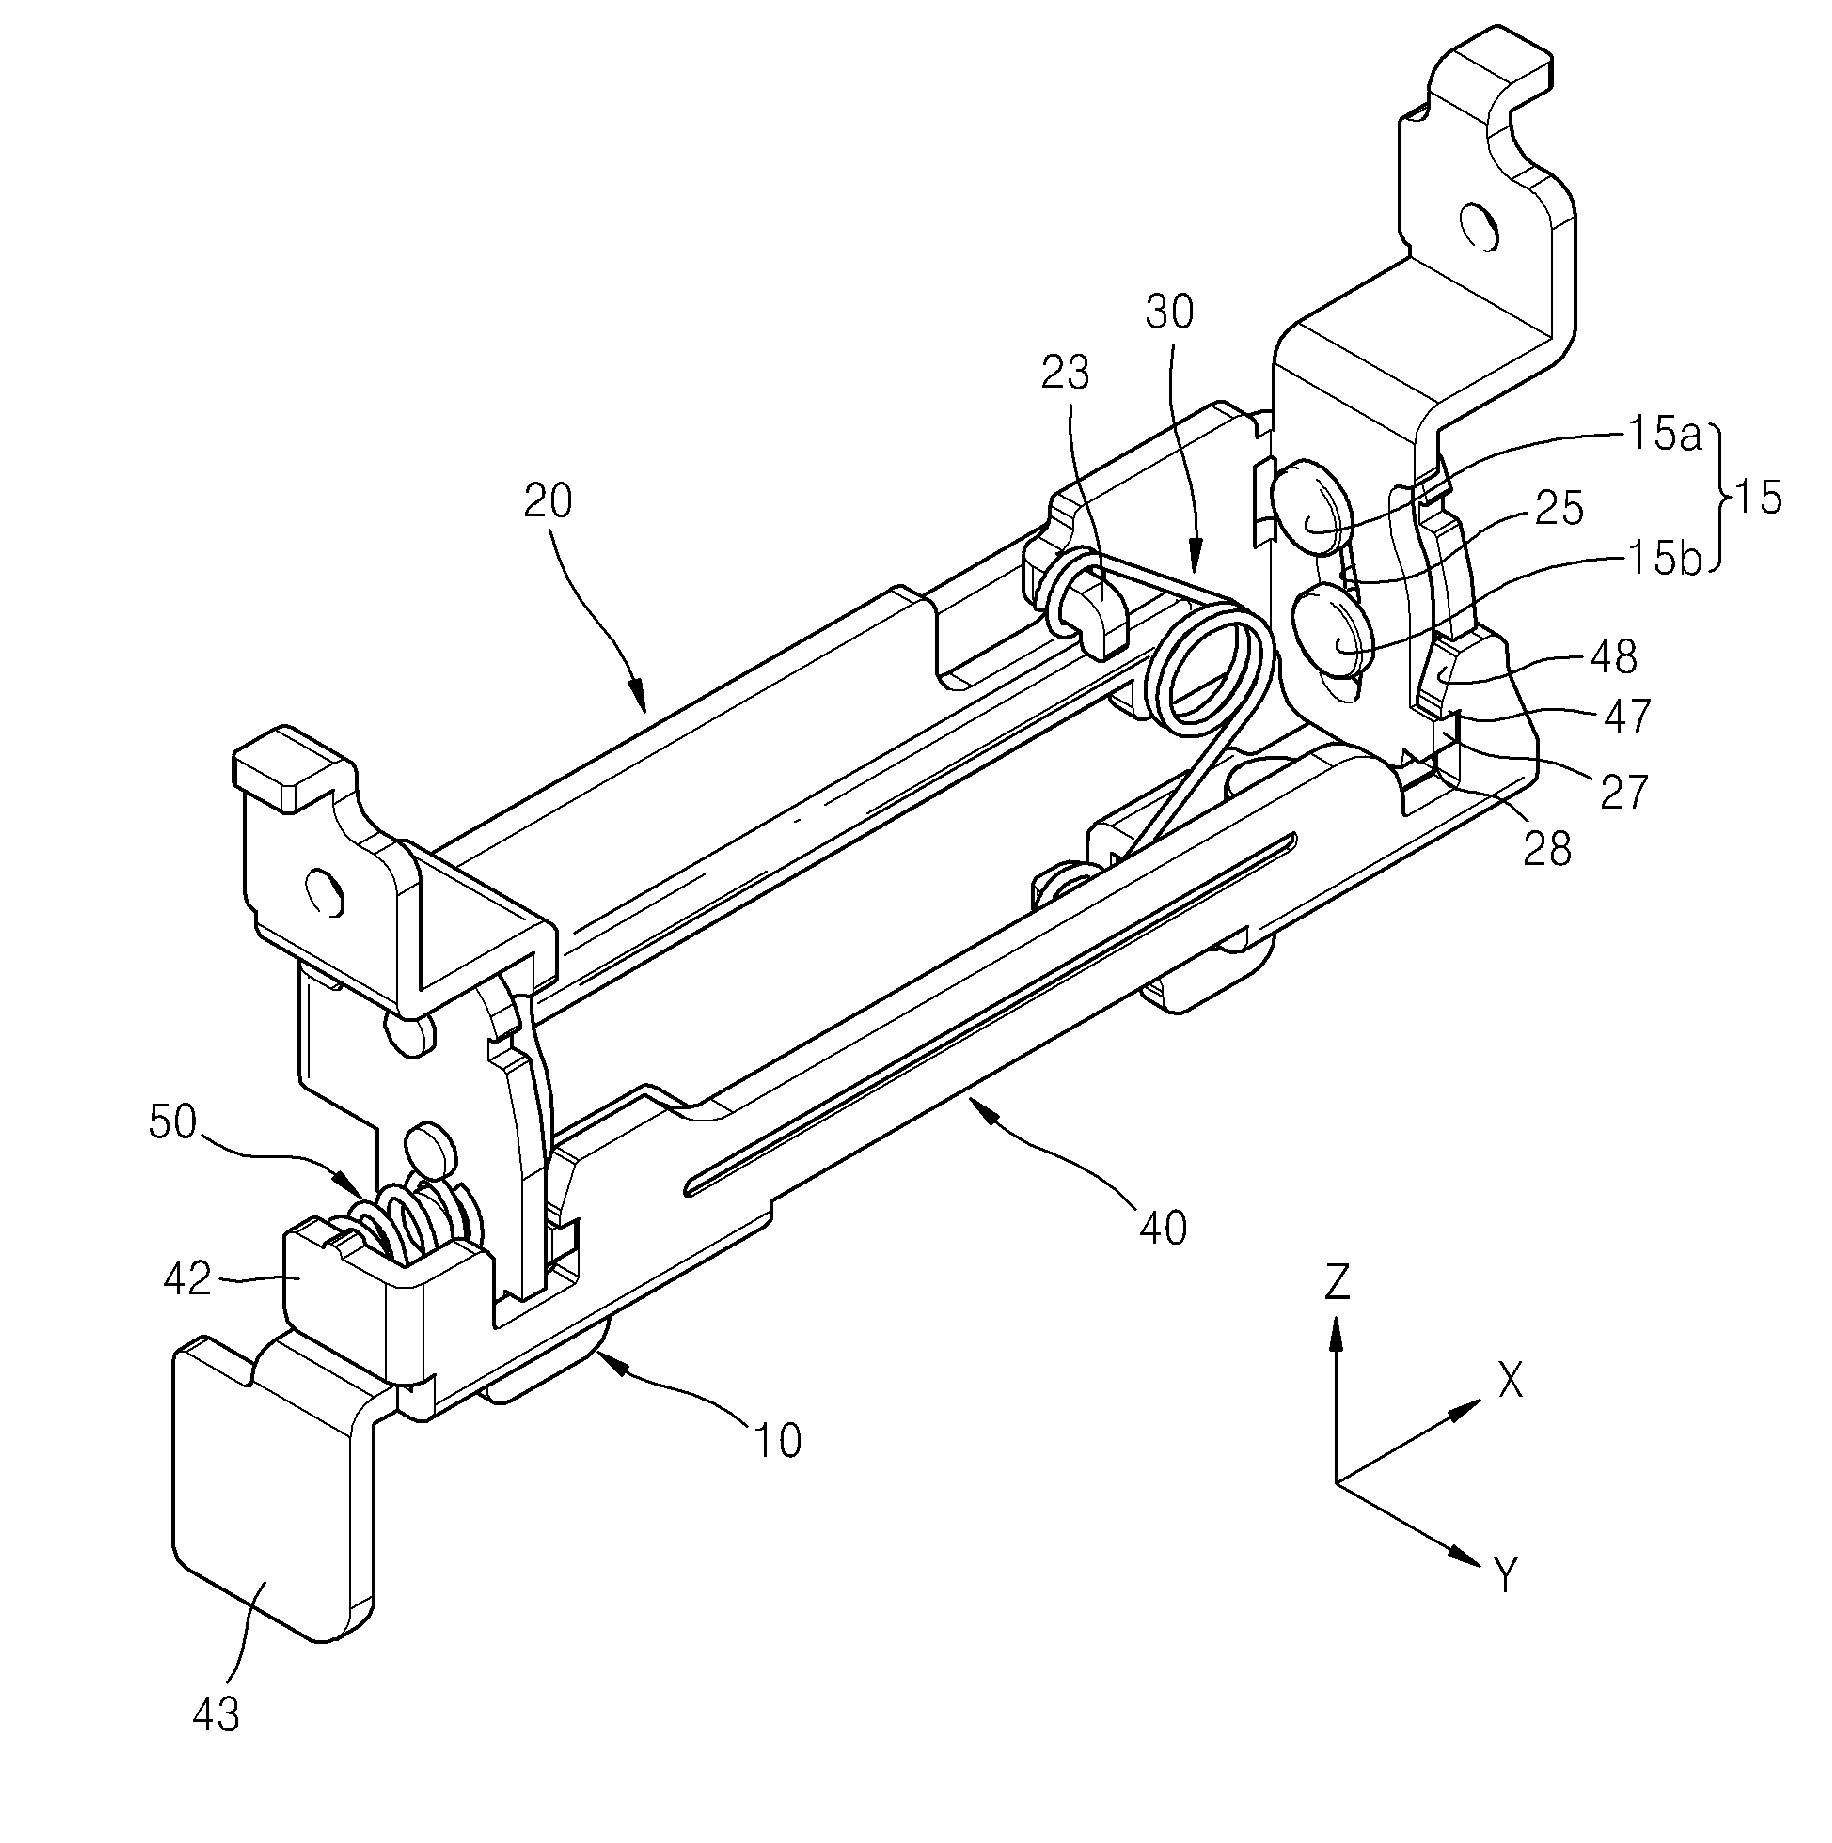 Tilt angle switchable hinge assembly for portable electronic devices